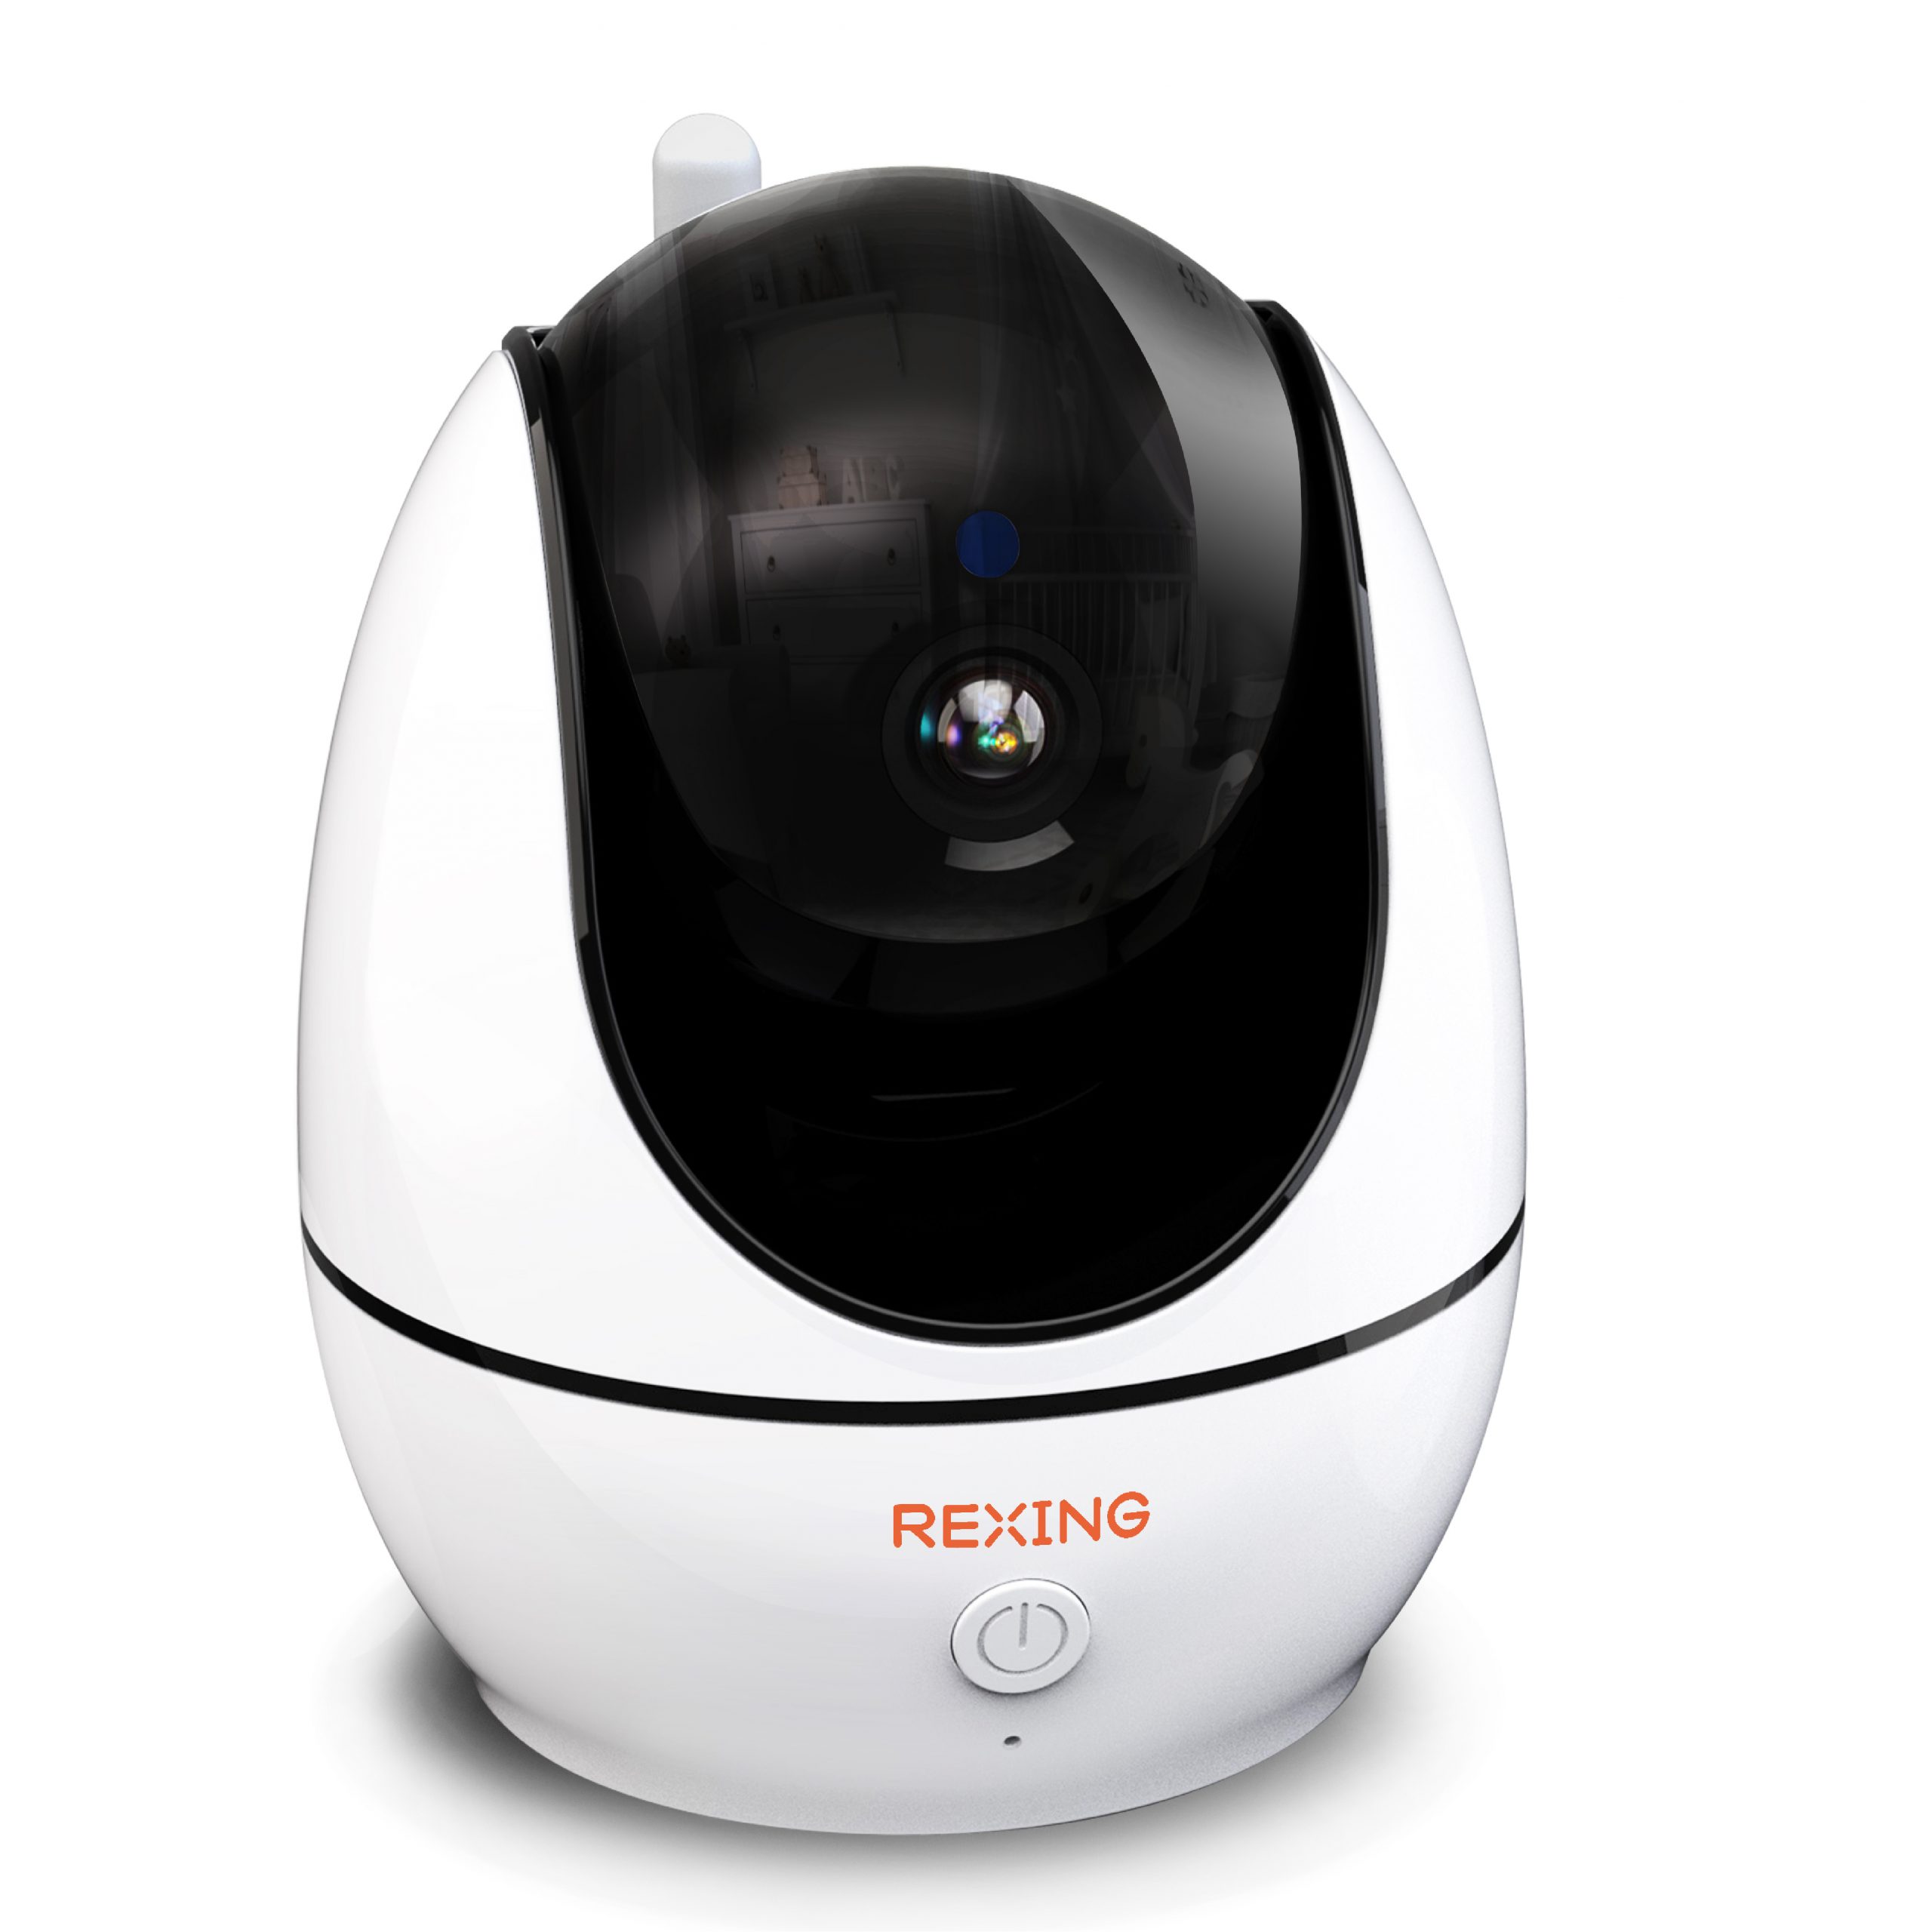 REXING Add-on Camera For BM1 Baby Monitor w/ Recording Capabilities 720p Video/Audio